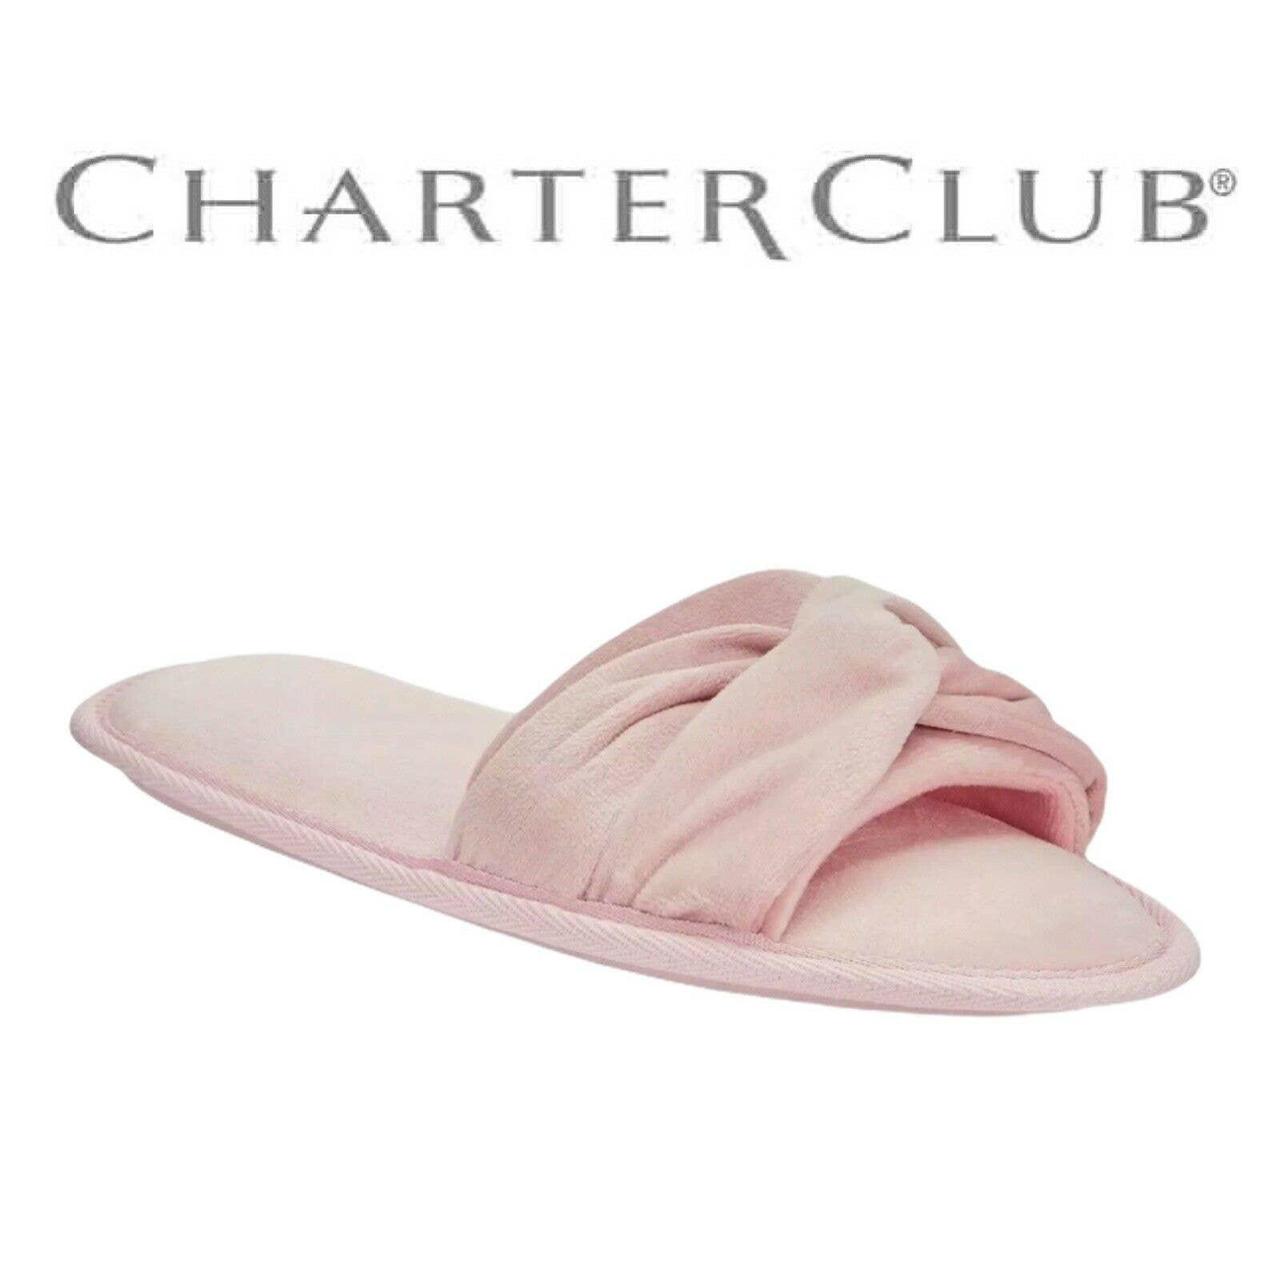 Charter Club Women's Pink Slippers (4)